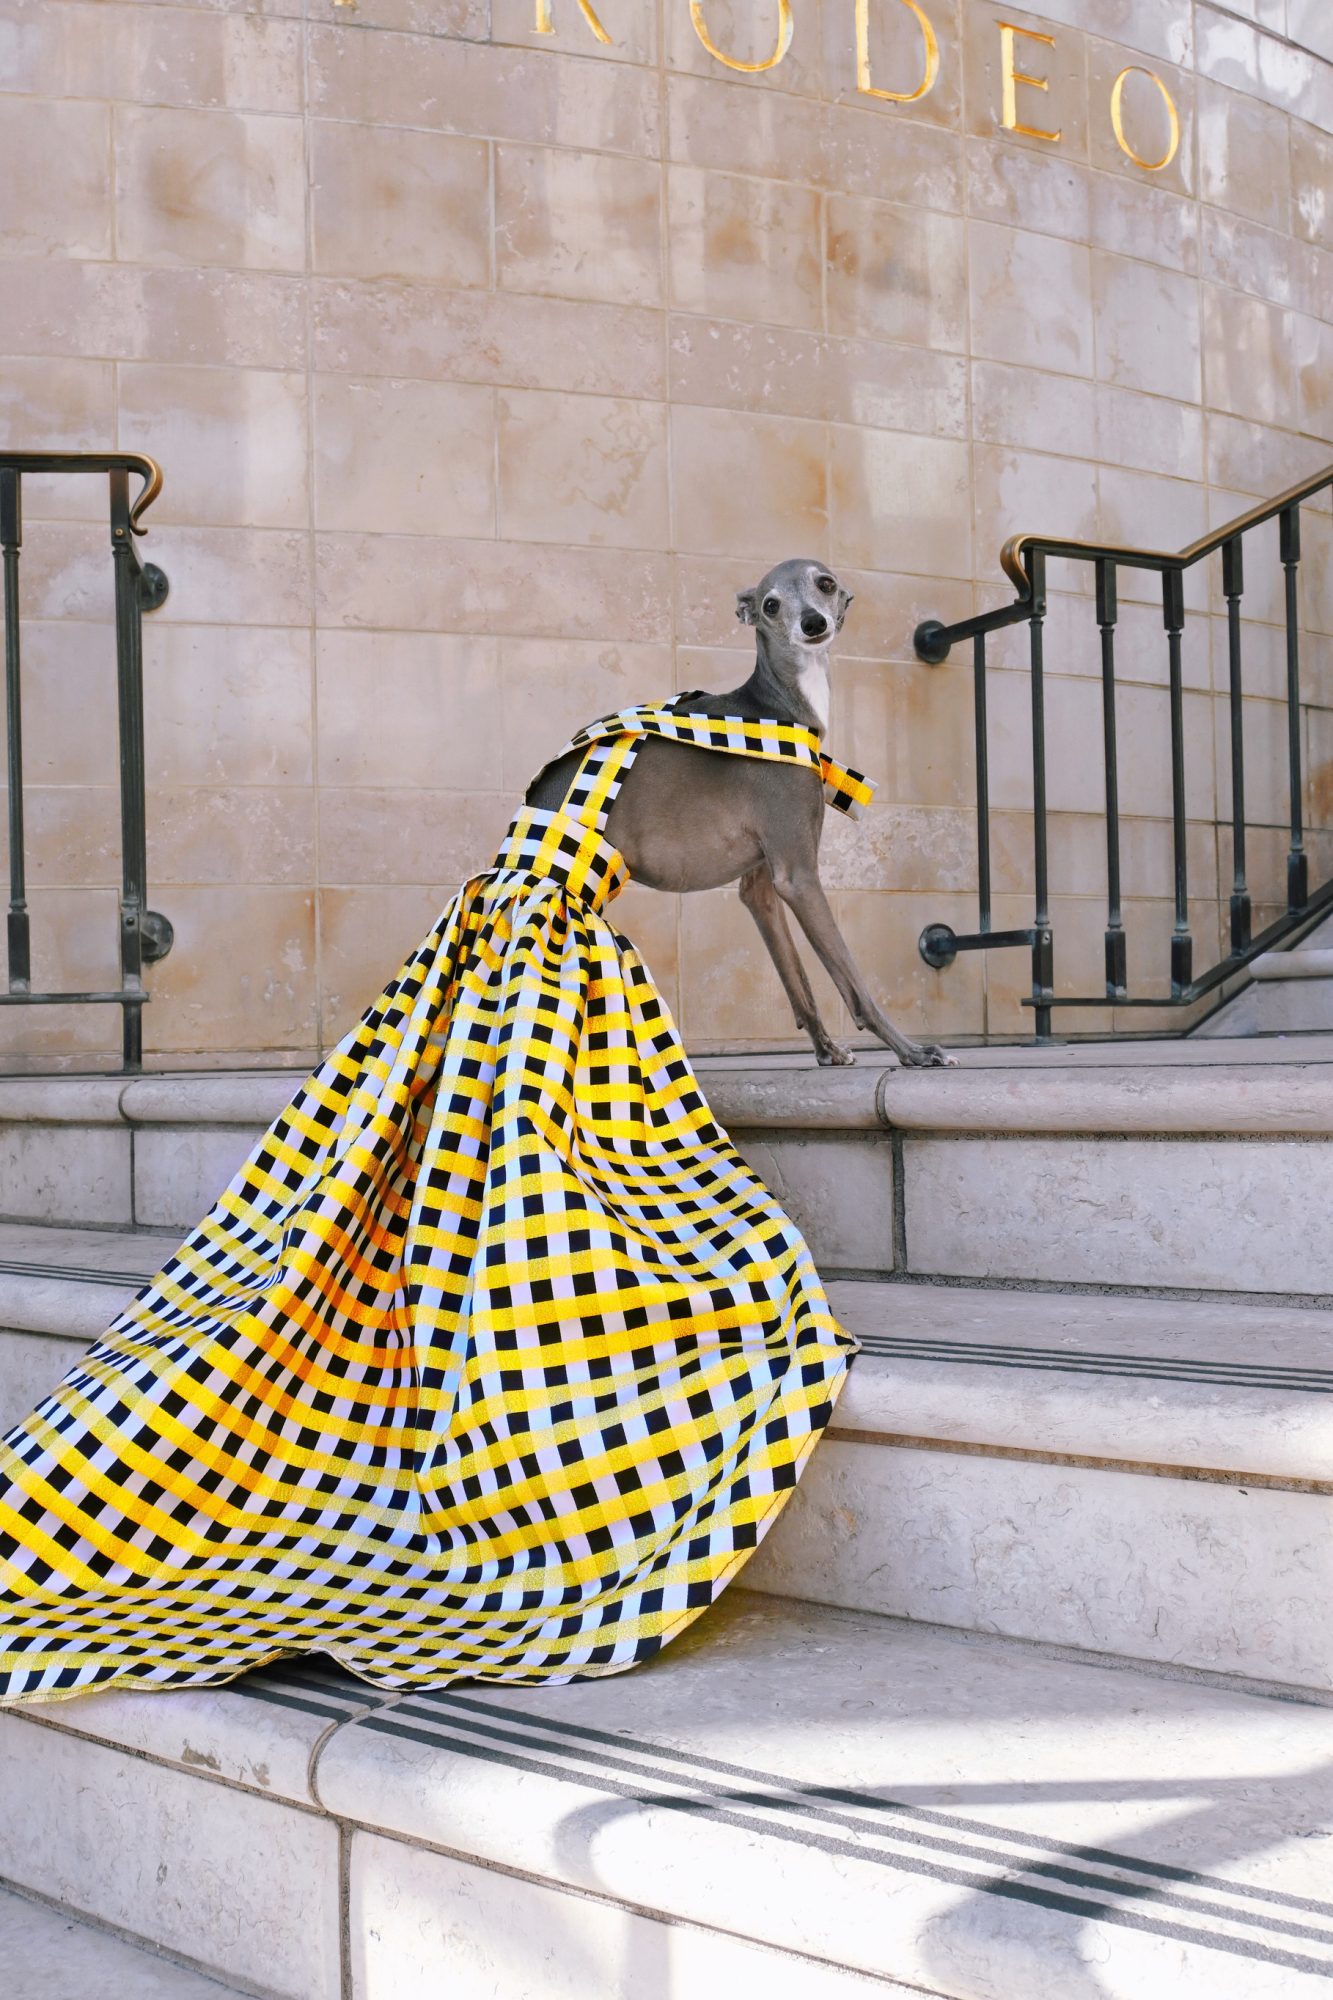 Tika the Iggy wearing a flowing yellow checkered dress on a concrete step.